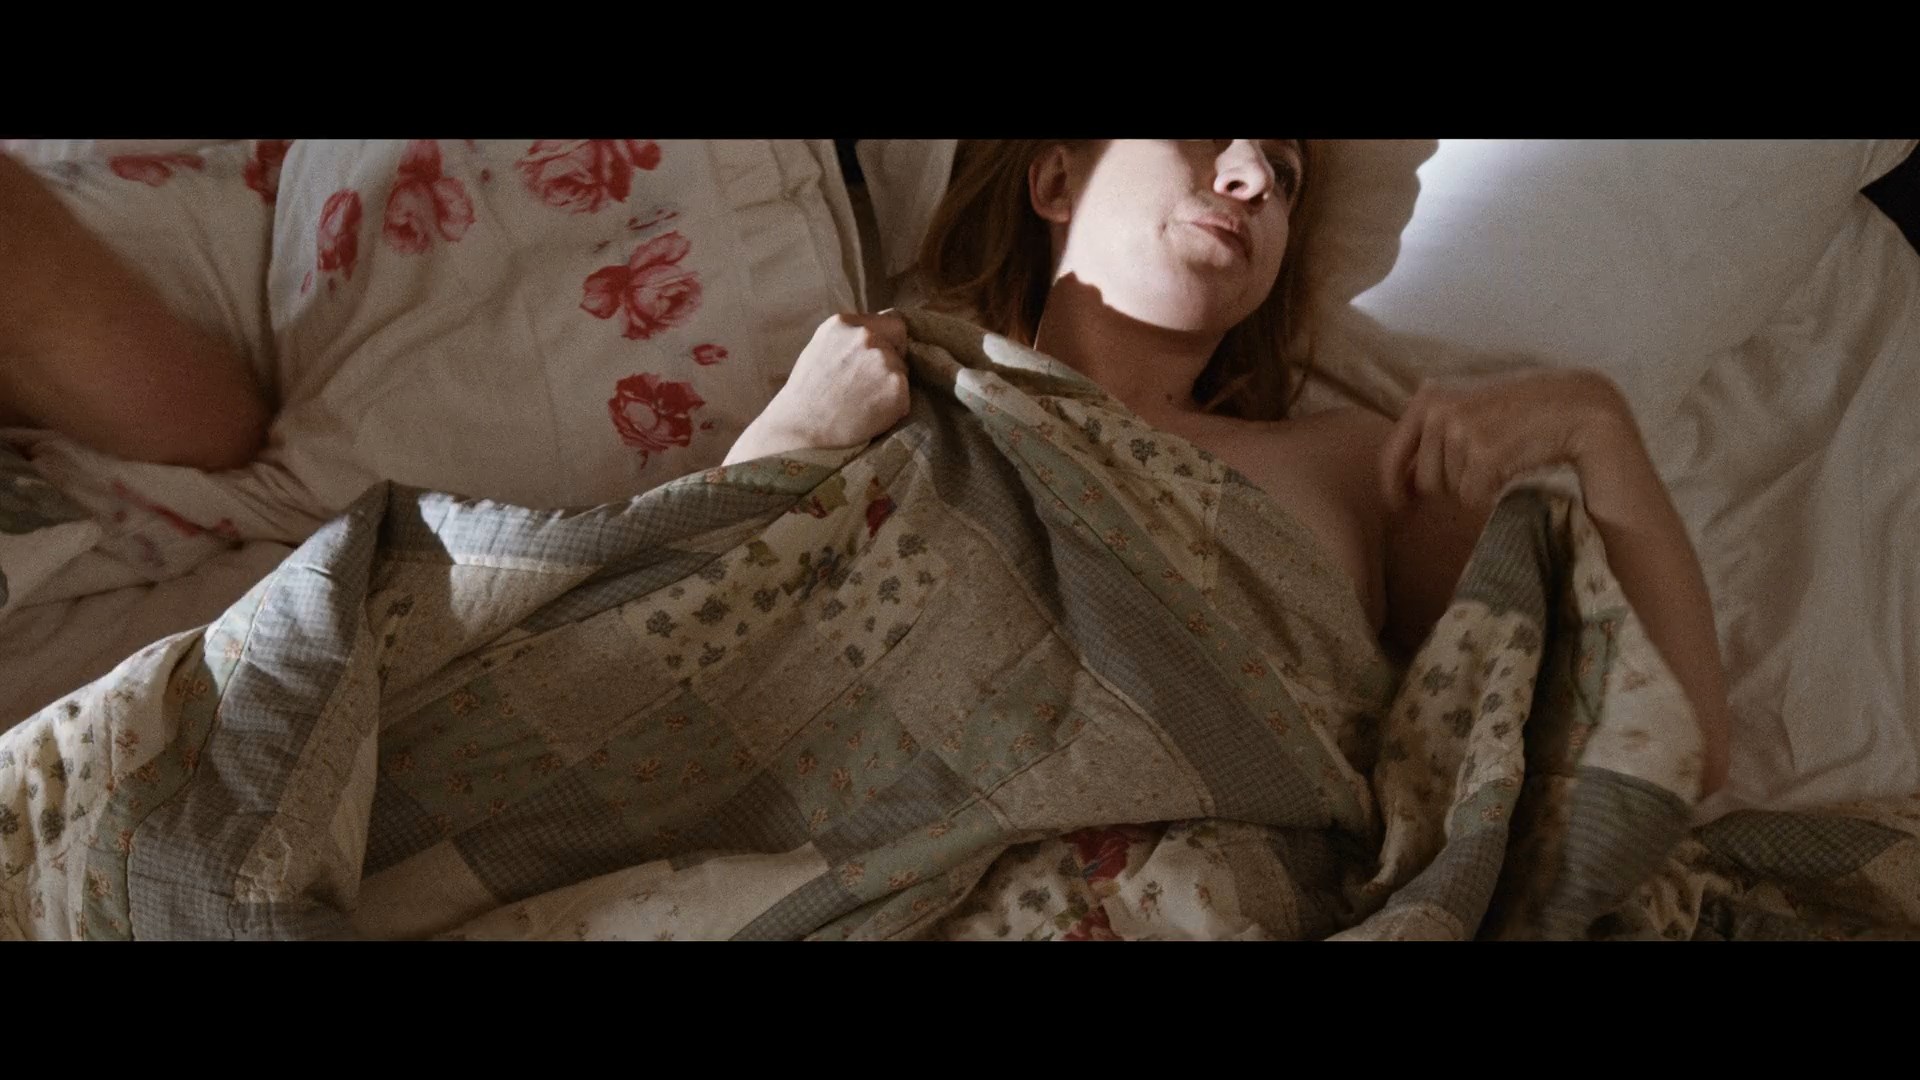 Victoria Smurfit briefly shows her tits when she is laying on the bed.